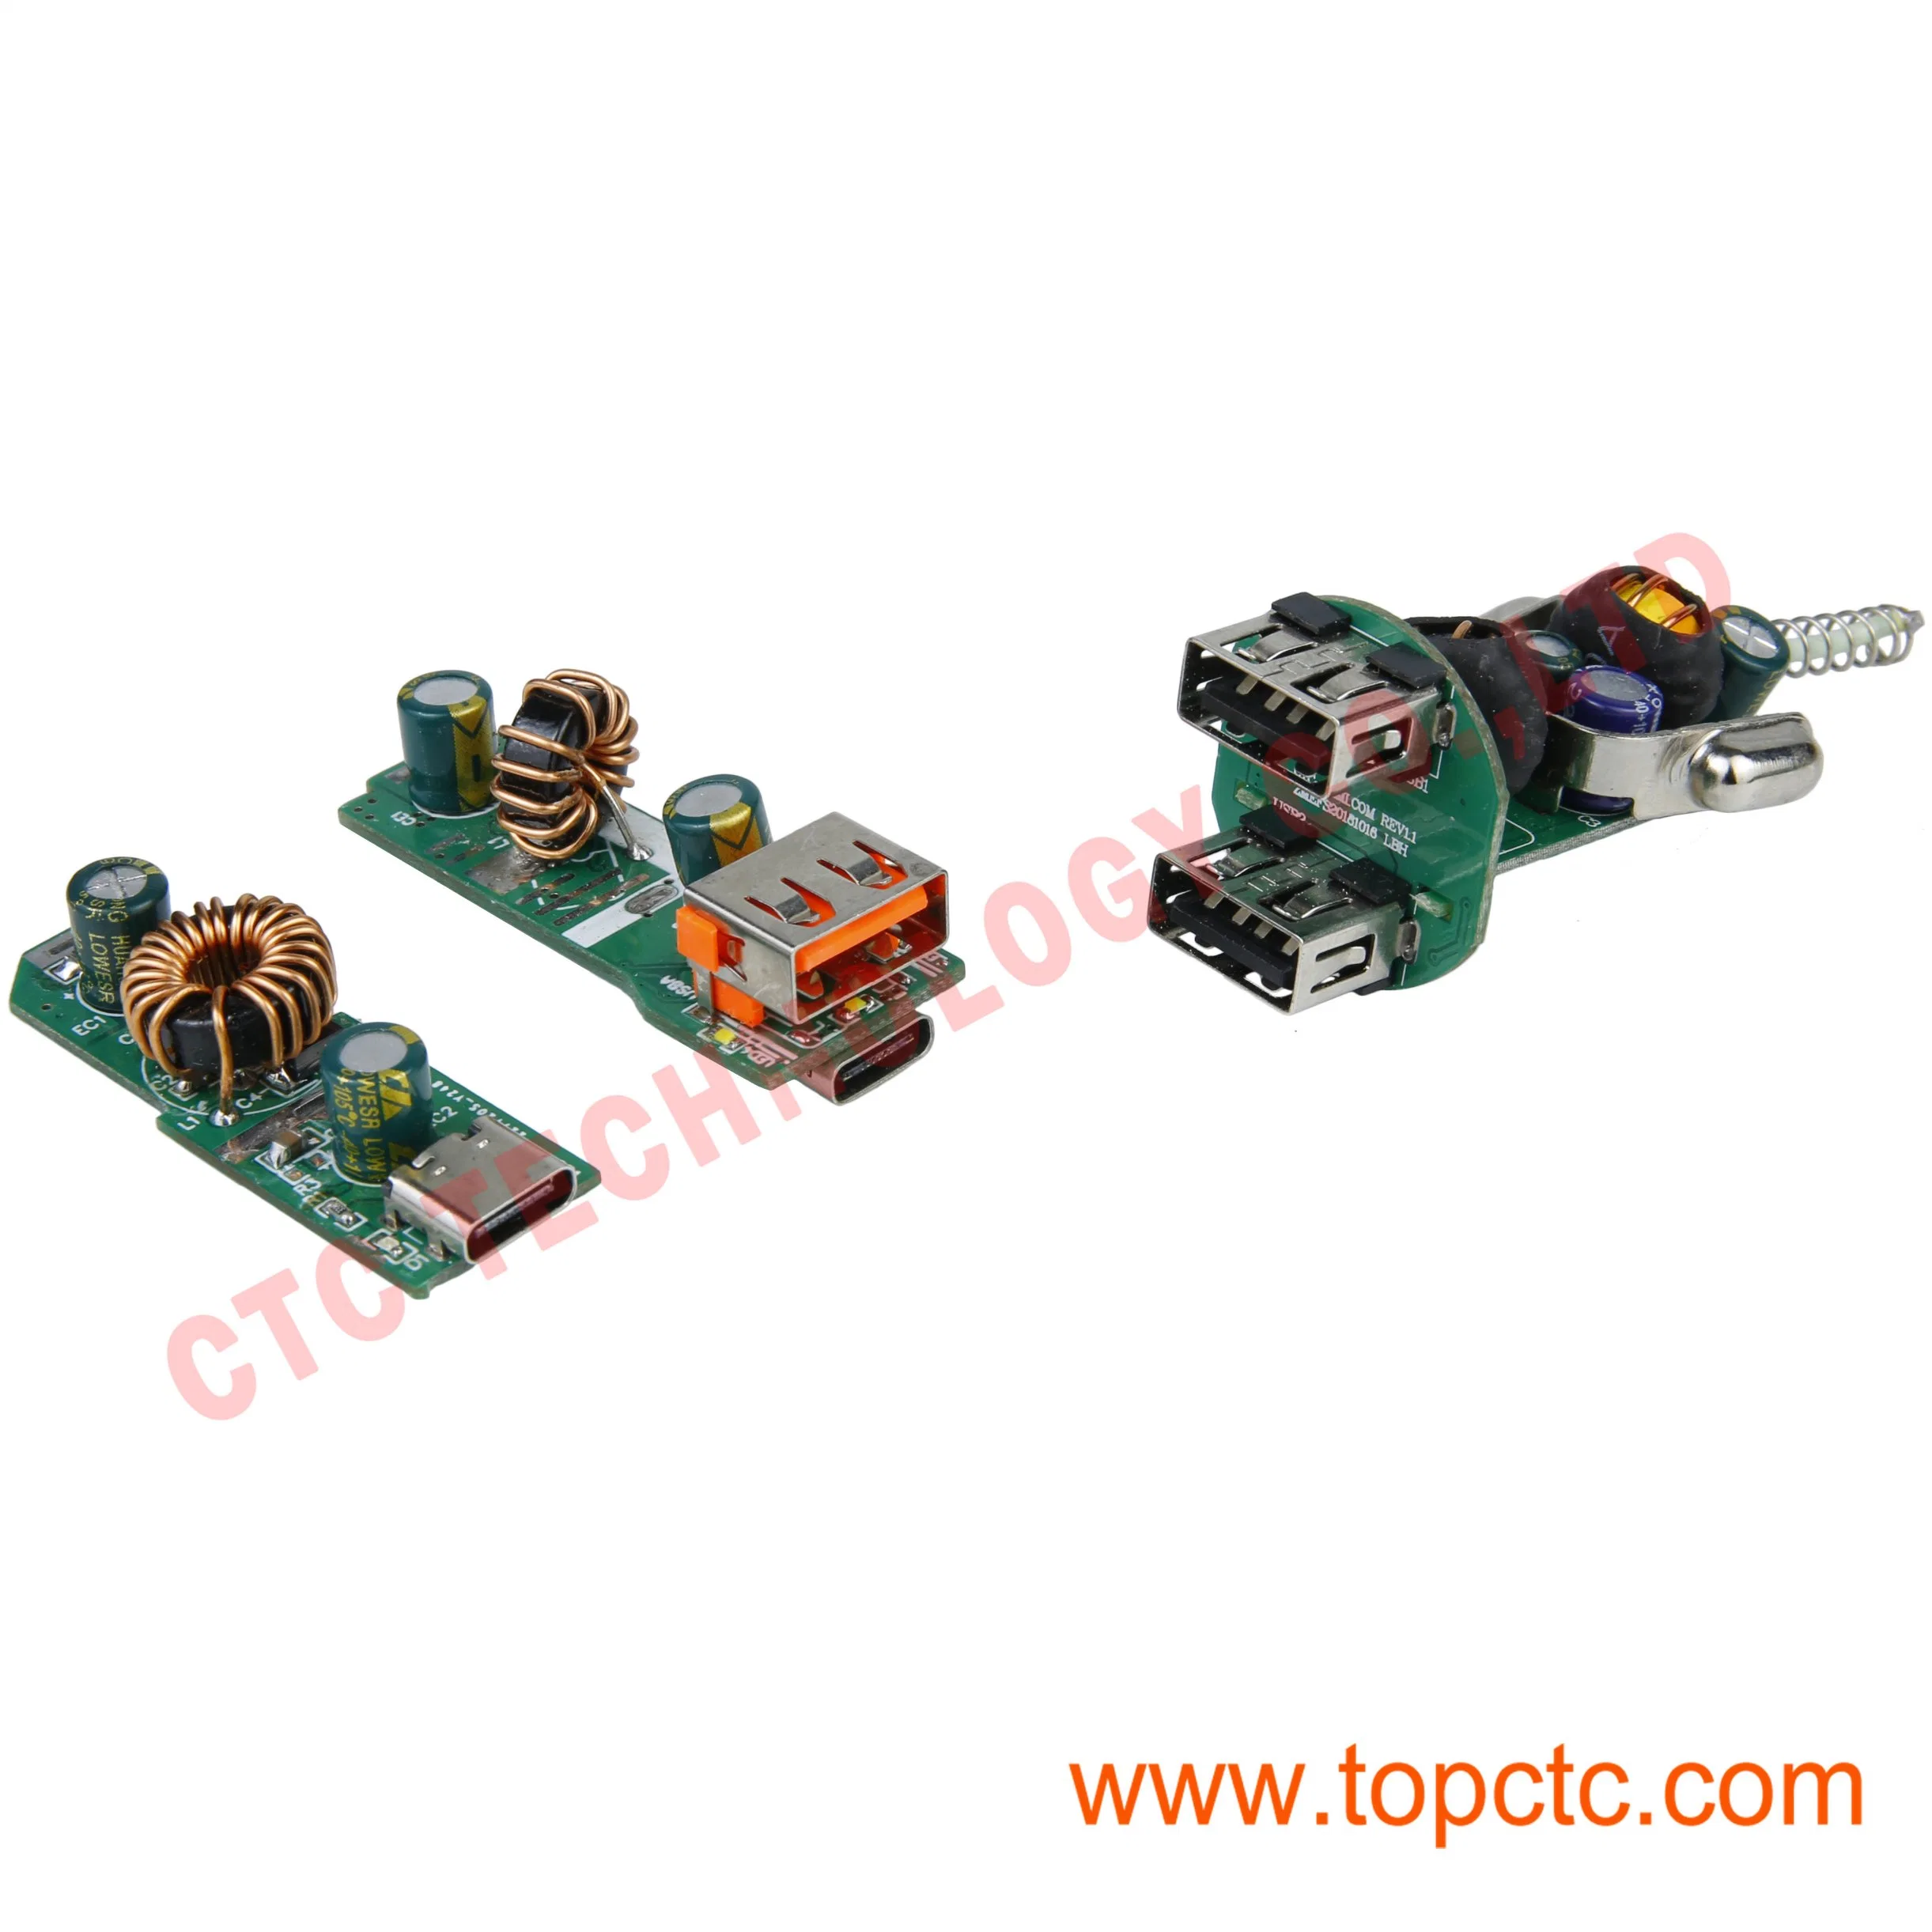 Car Charger Consumer ELectronic Circuit Board PCBA